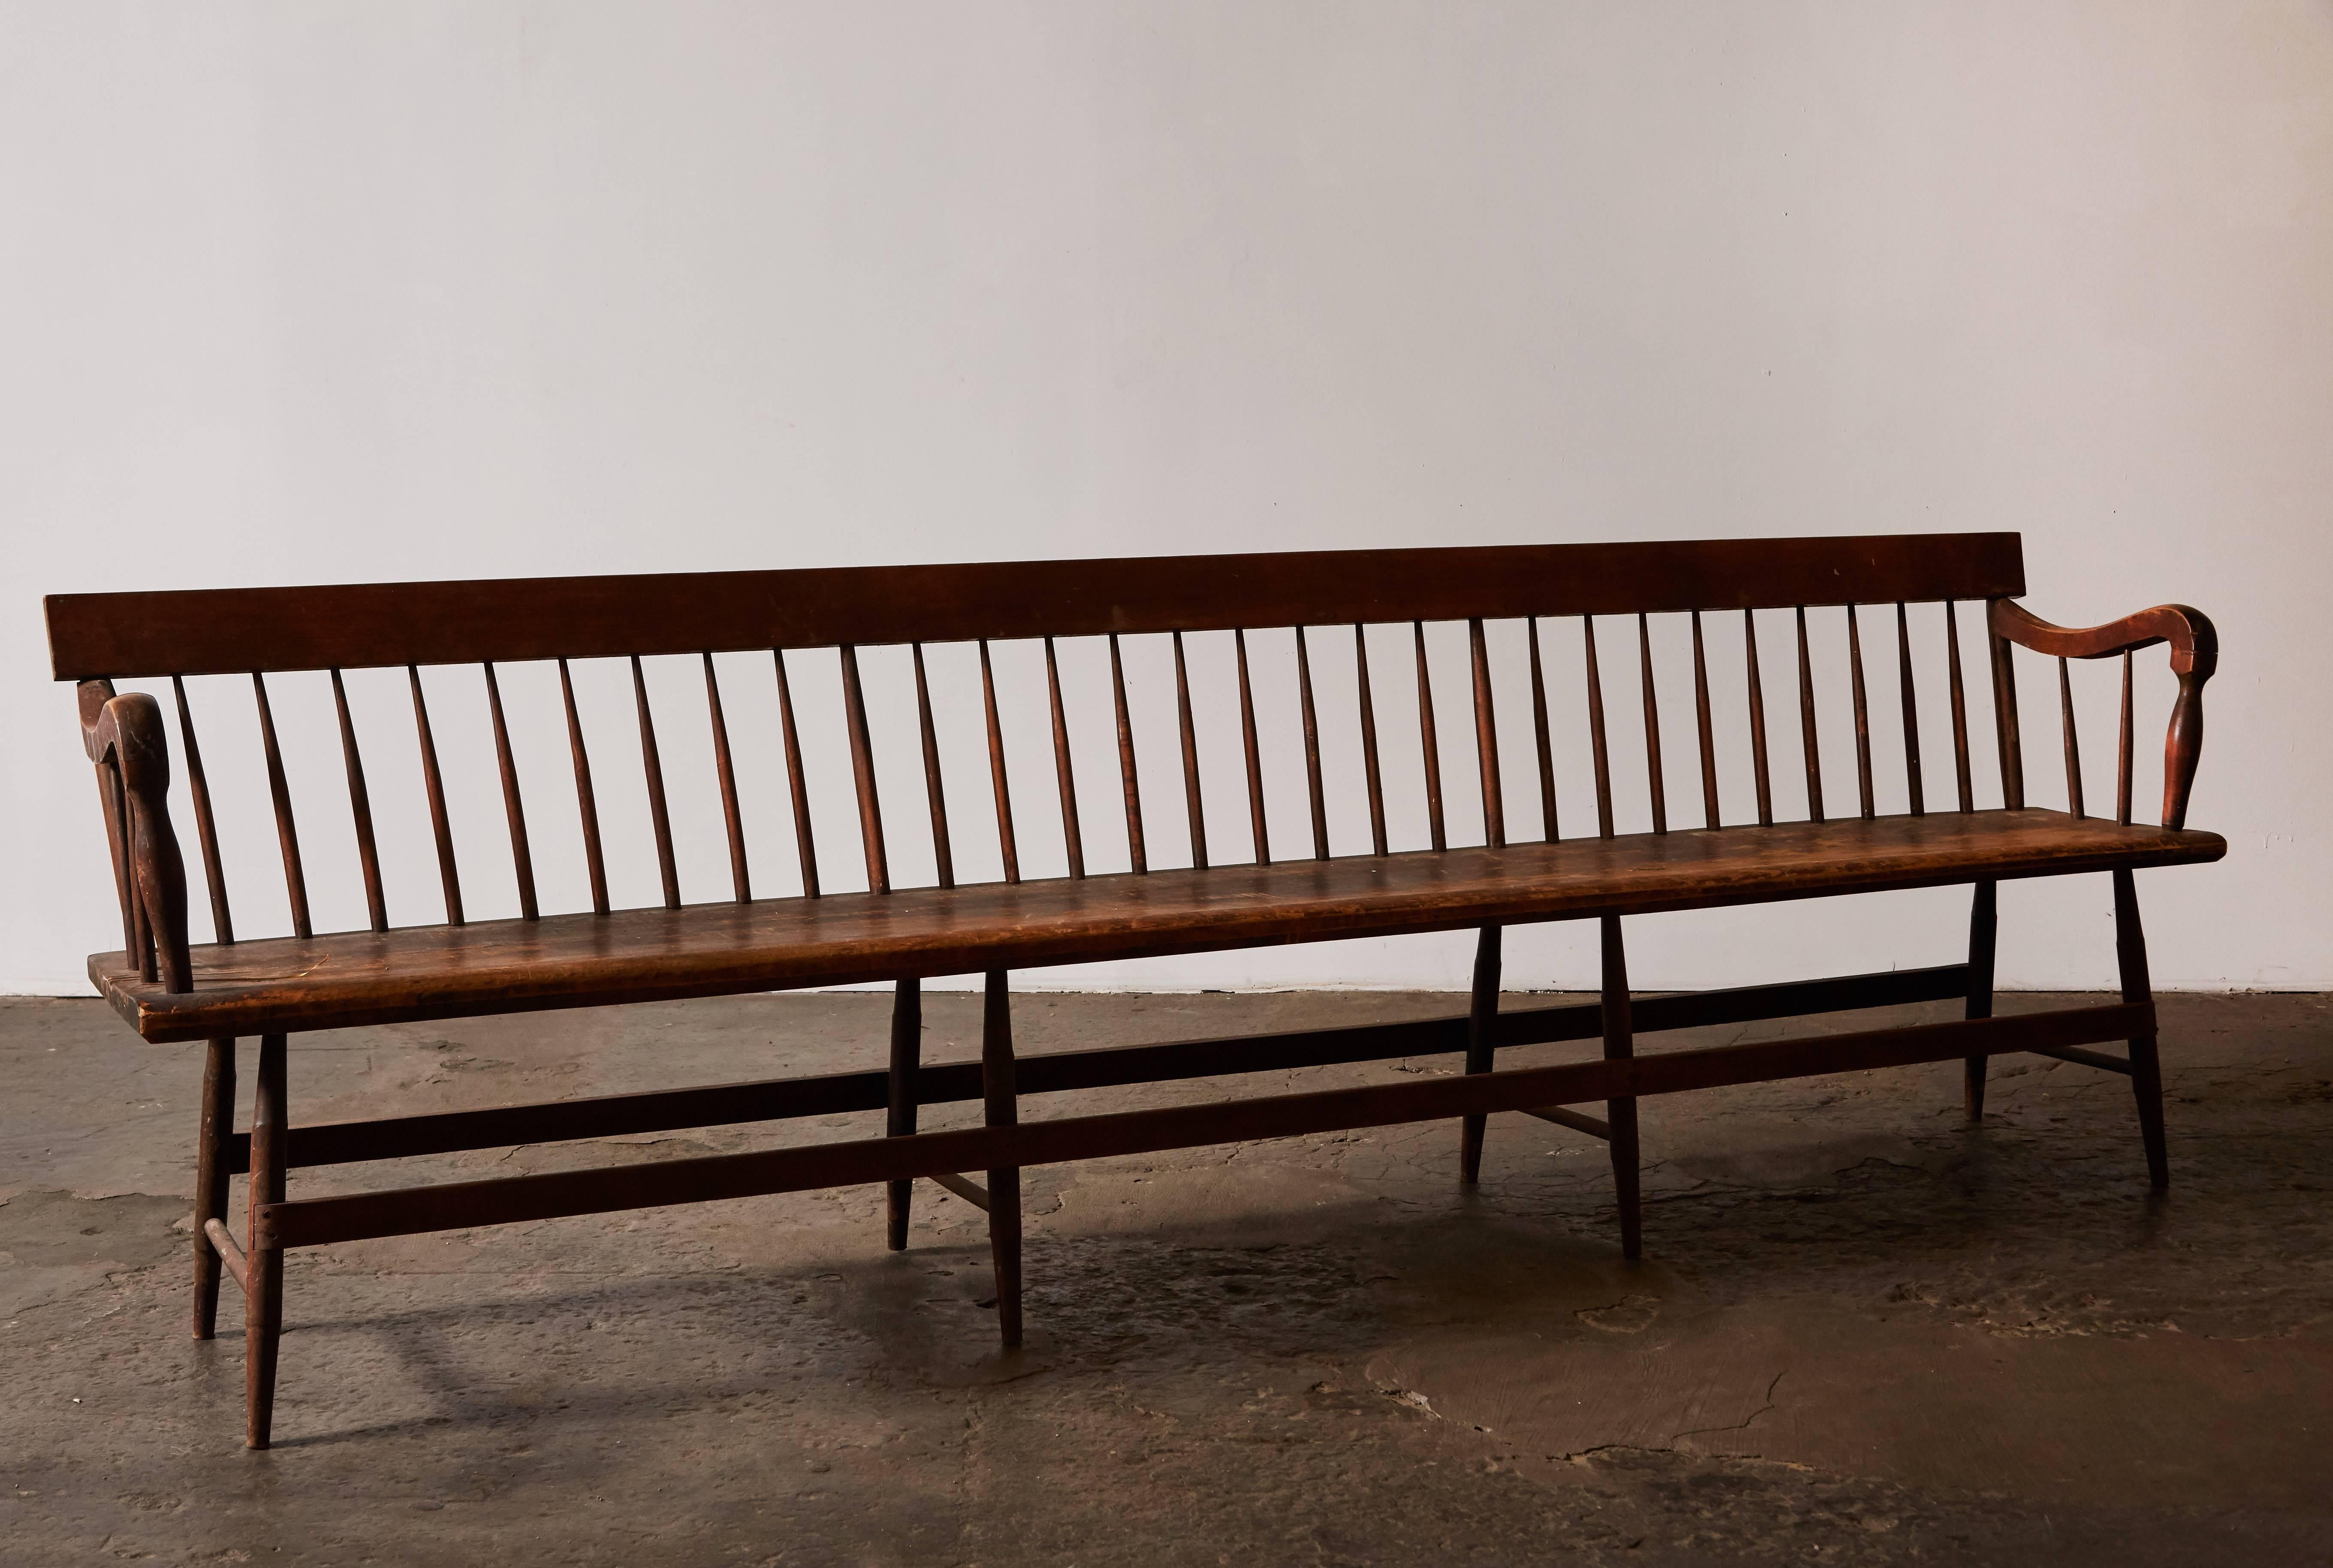 Extra-long spindle Deacon's bench with New Hamspshire birch and mahogany. Made in USA, circa early 20th century.